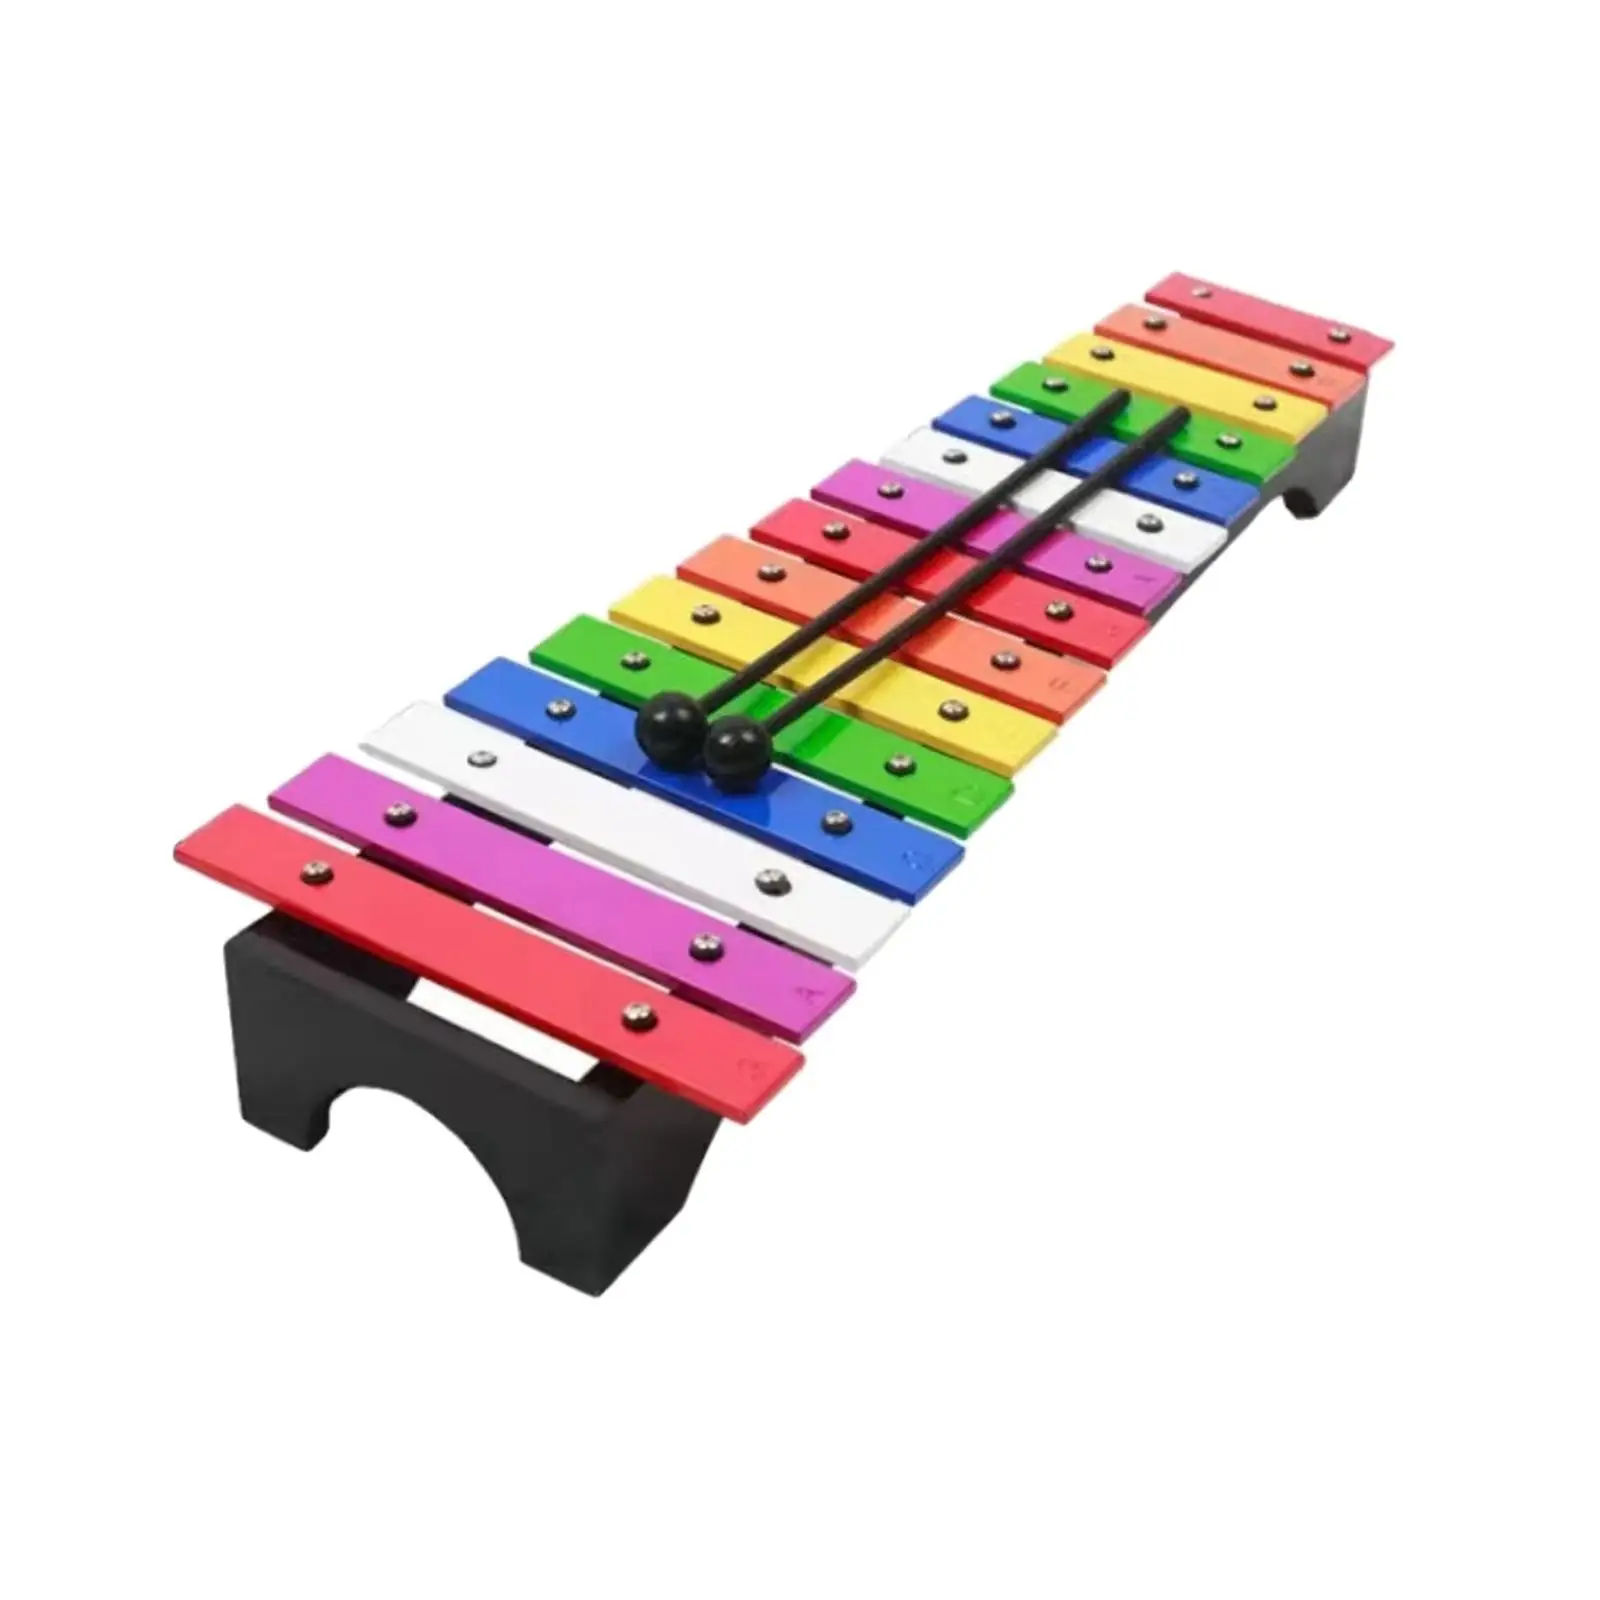 15 Note Xylophone Metal Enlightenment Percussion Instrument for Outside Live Performance Event School Orchestras Music Lessons